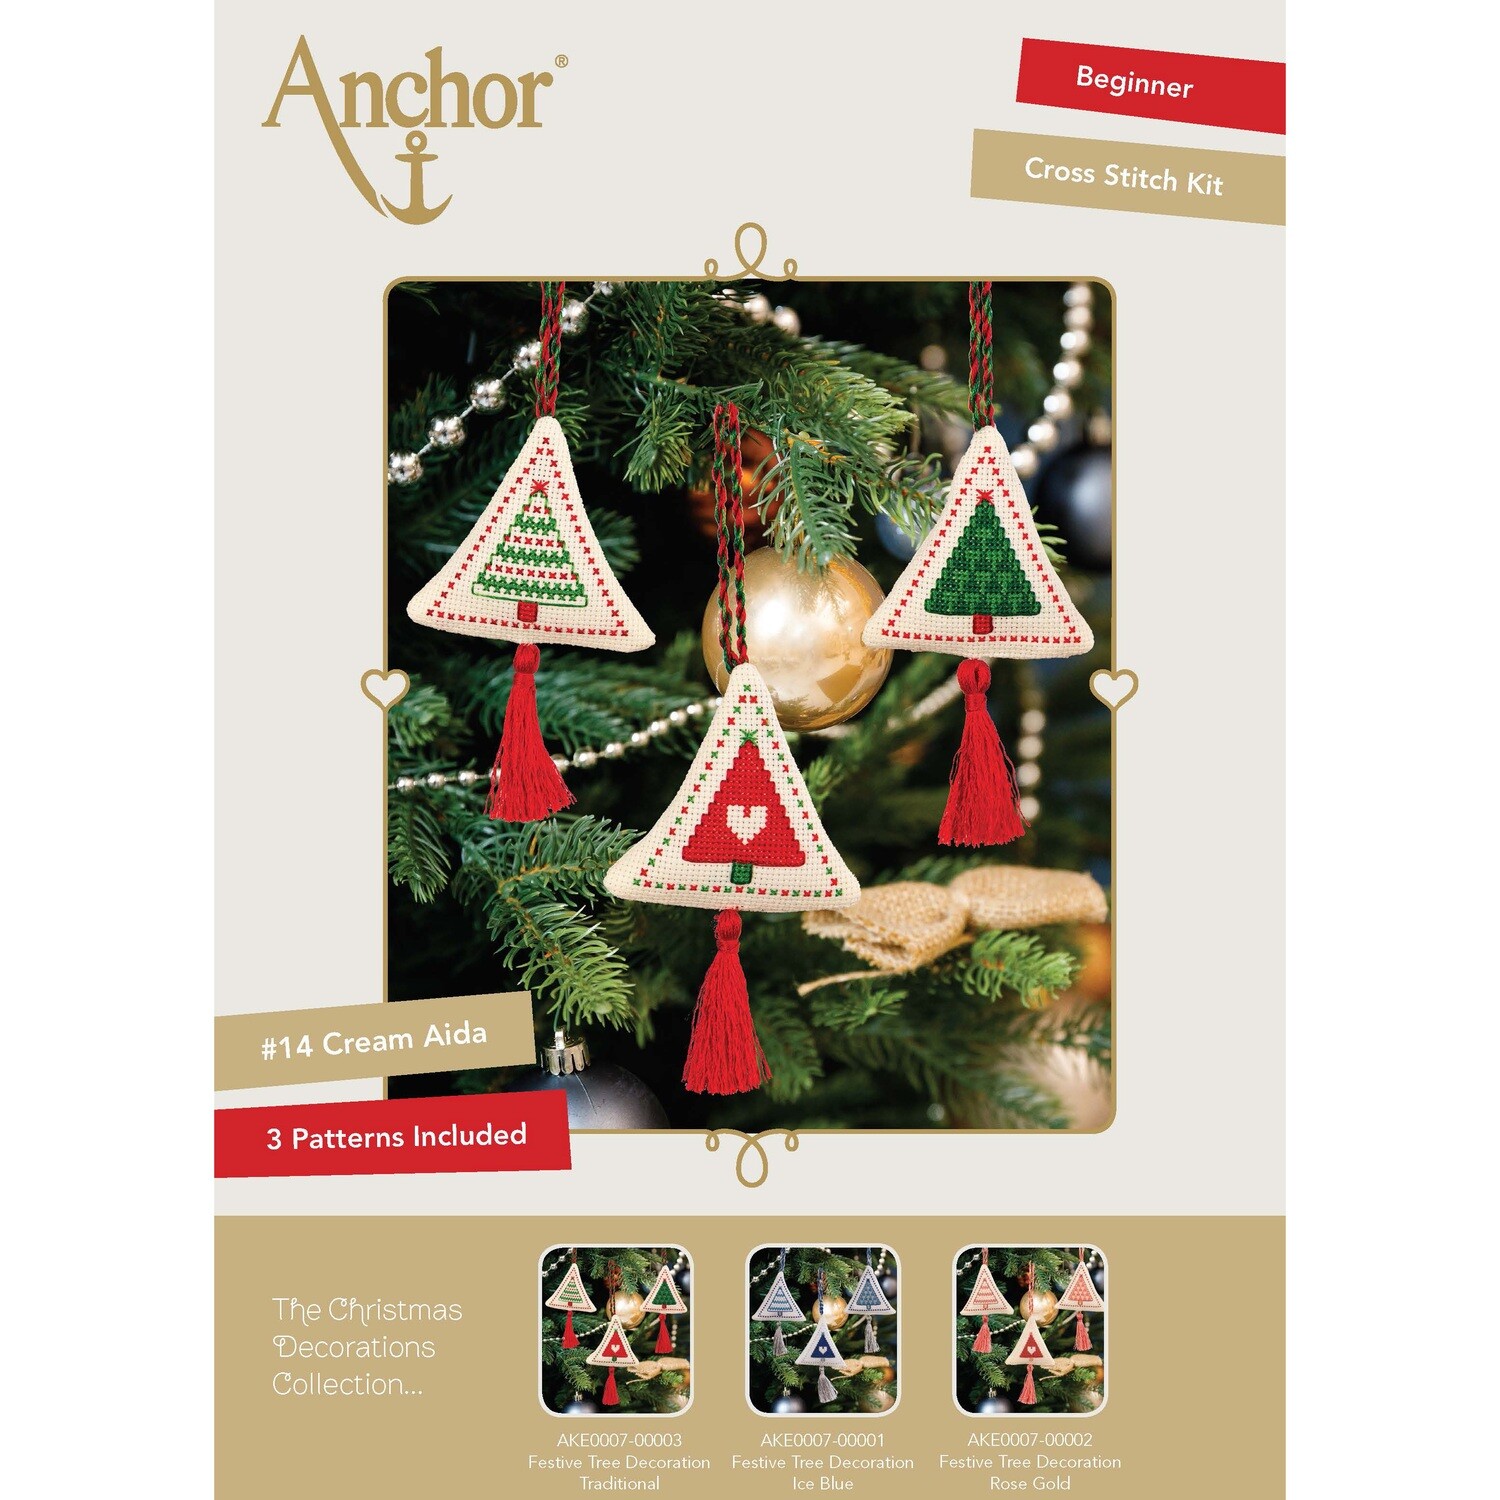 The Christmas Decorations Collection - Festive Tree Decoration Traditional